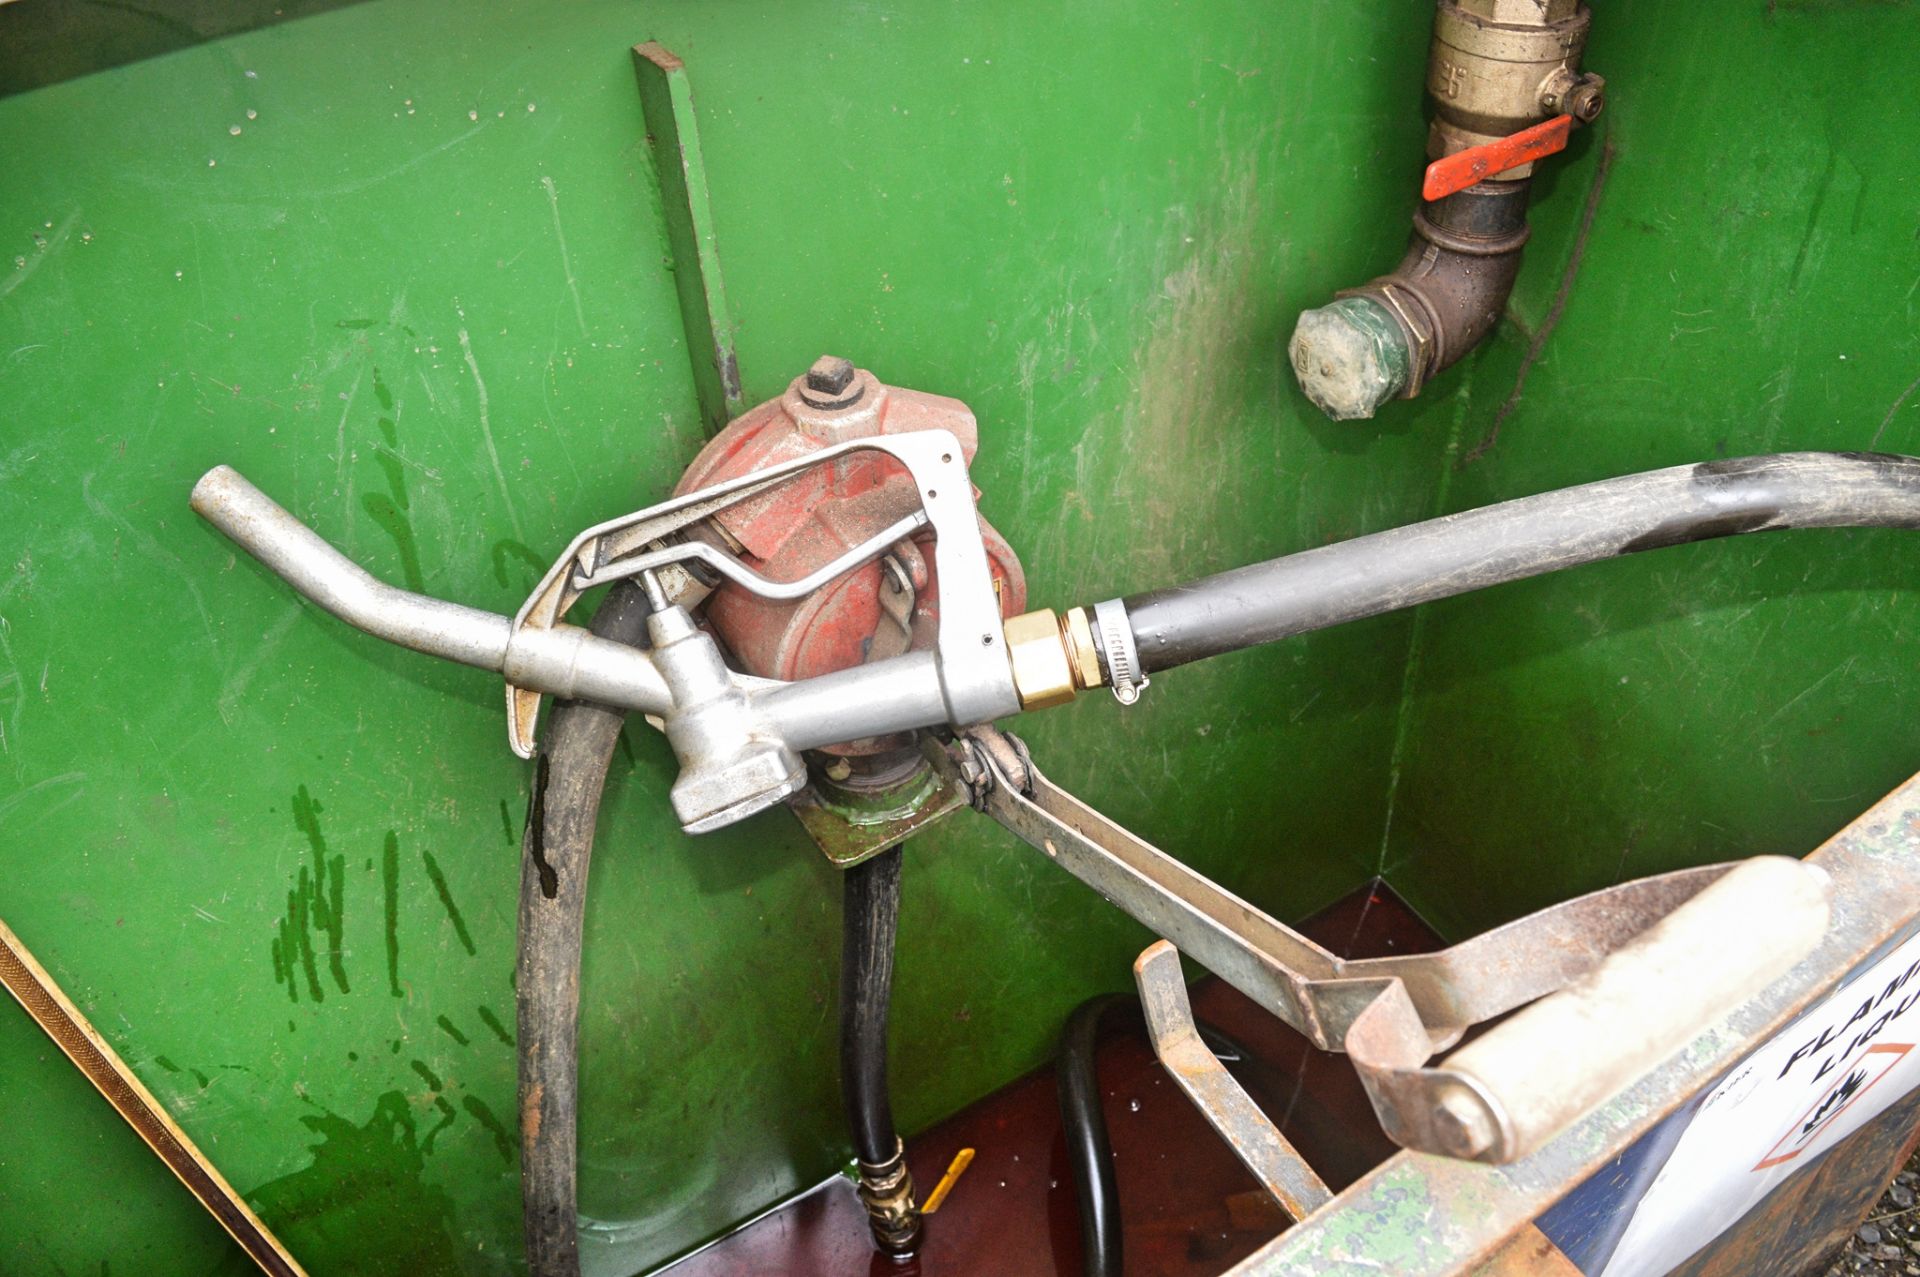 500 gallon static bunded fuel bowser c/w hand pump, delivery hose & nozzle - Image 2 of 2